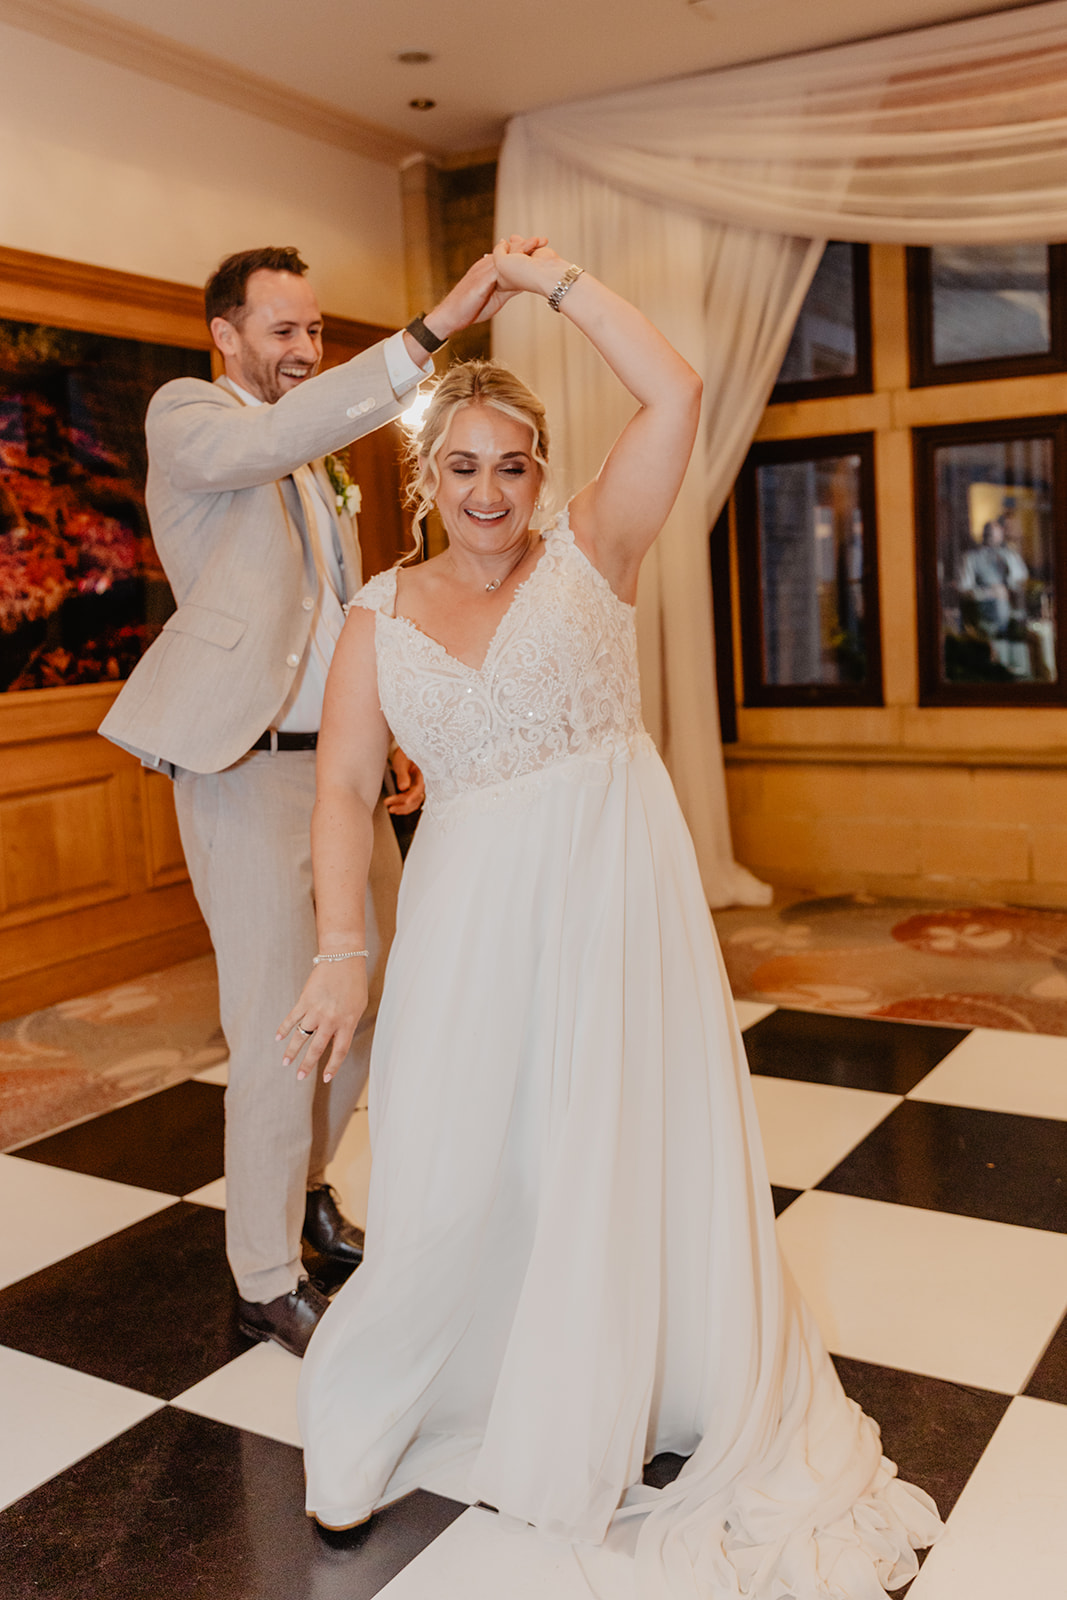 Bride and groom first dance at a South Lodge, Sussex Wedding. By Olive Joy Photography